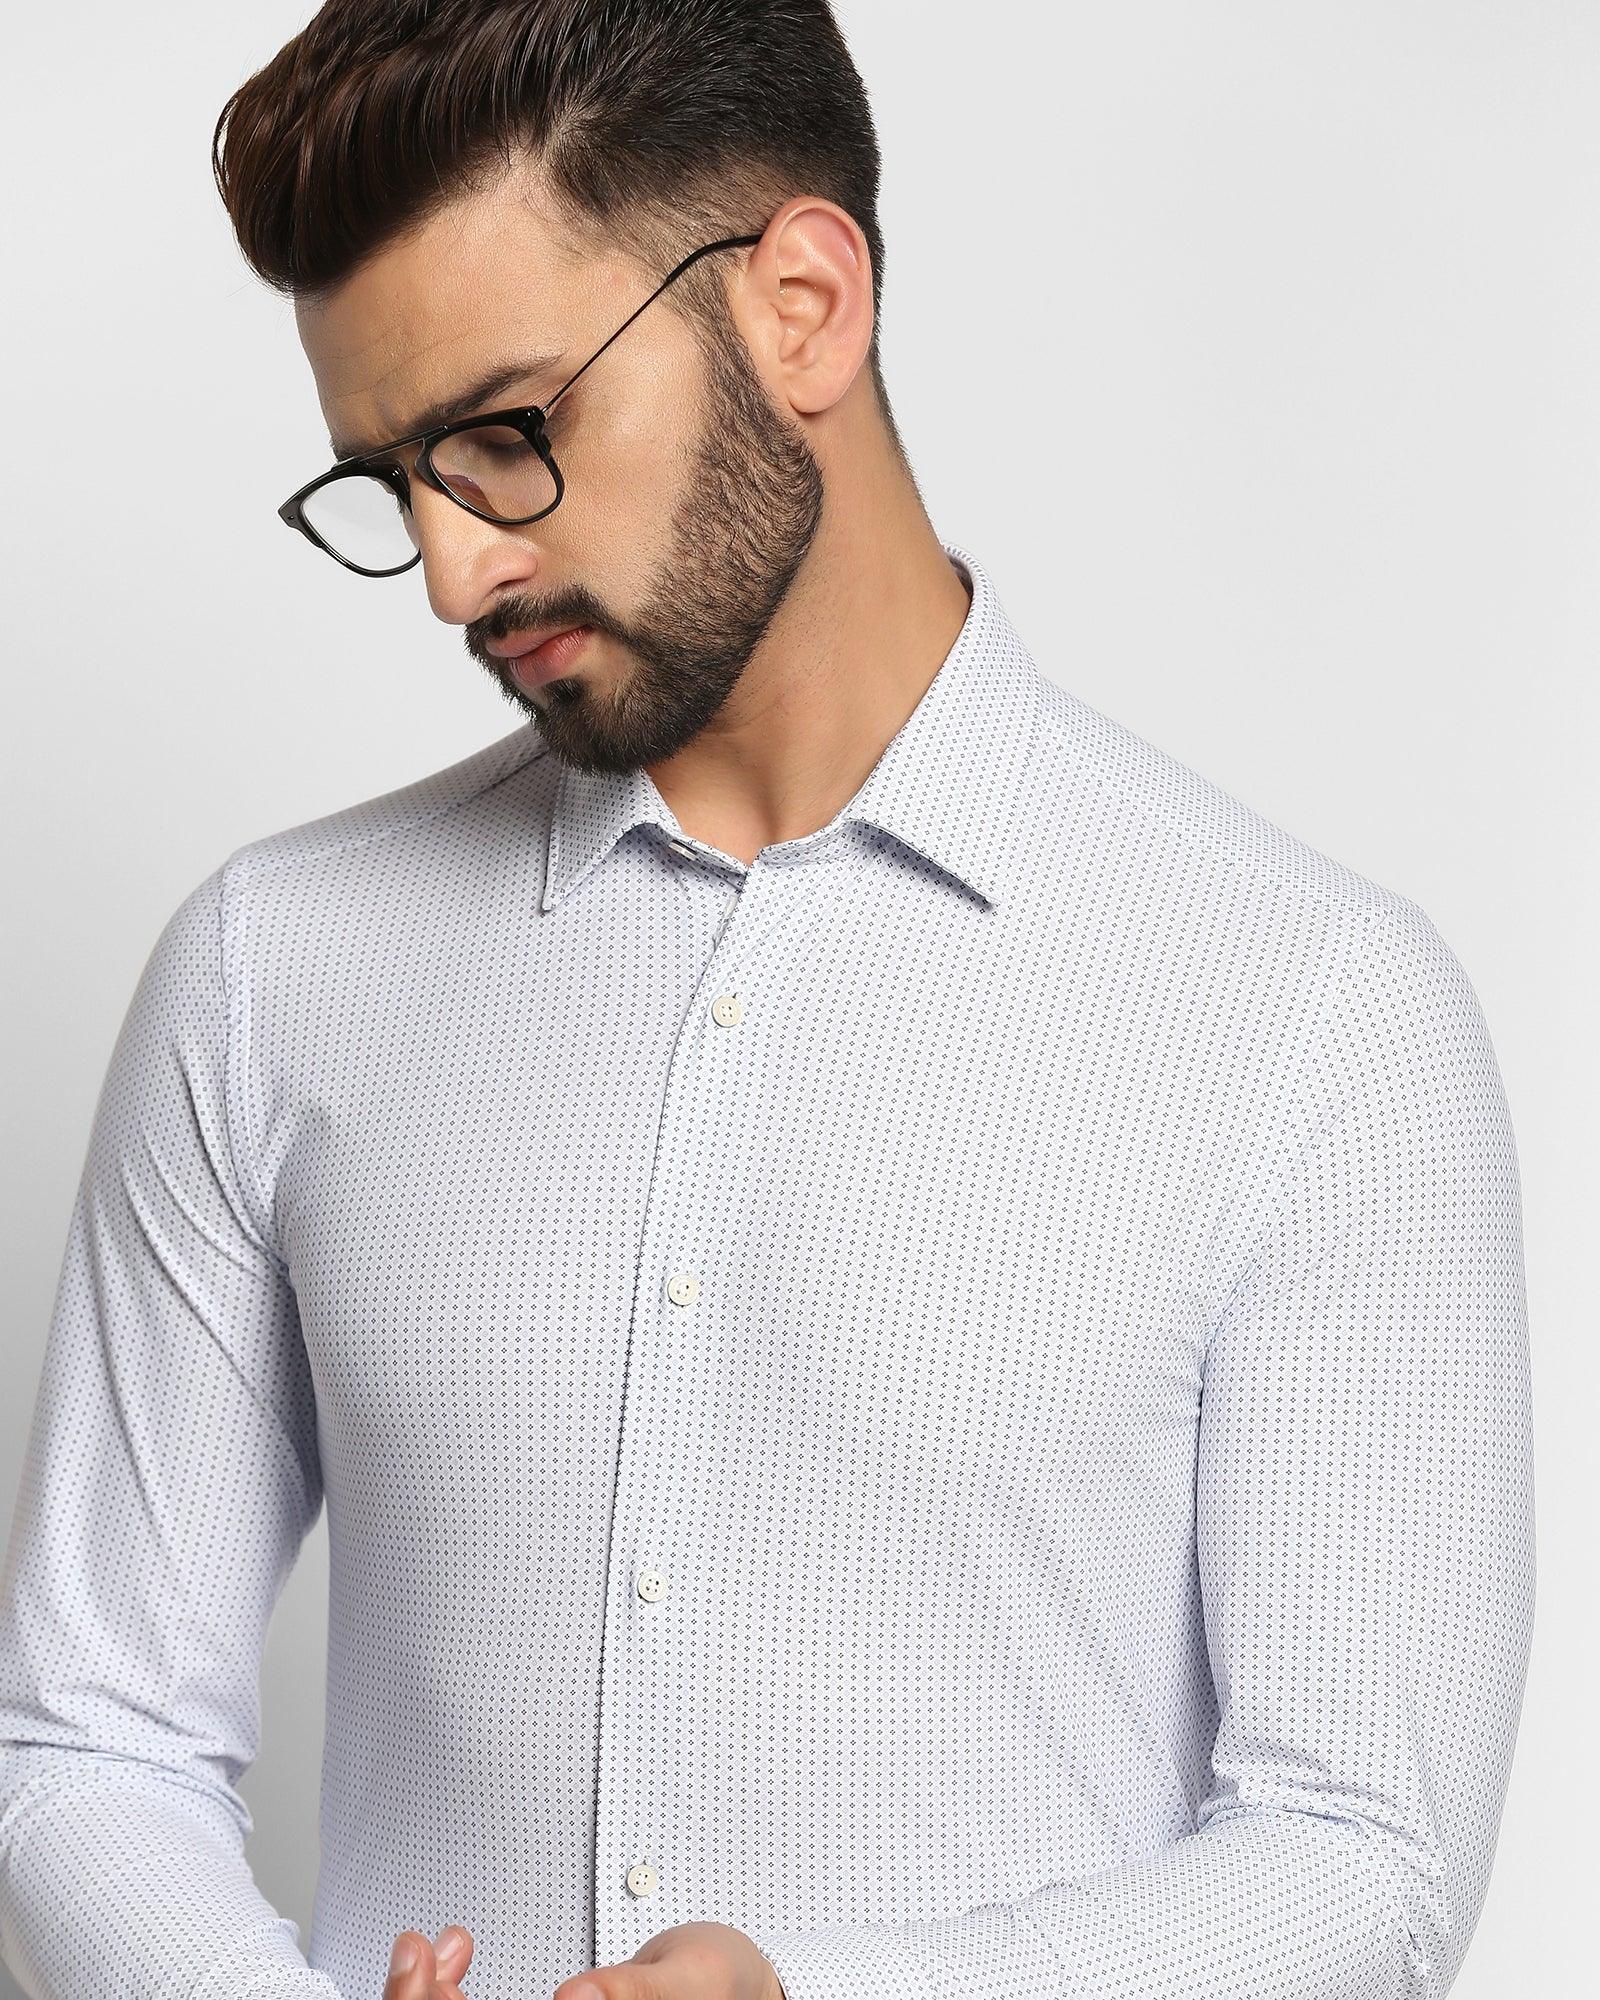 Formal White Printed Shirt - Client